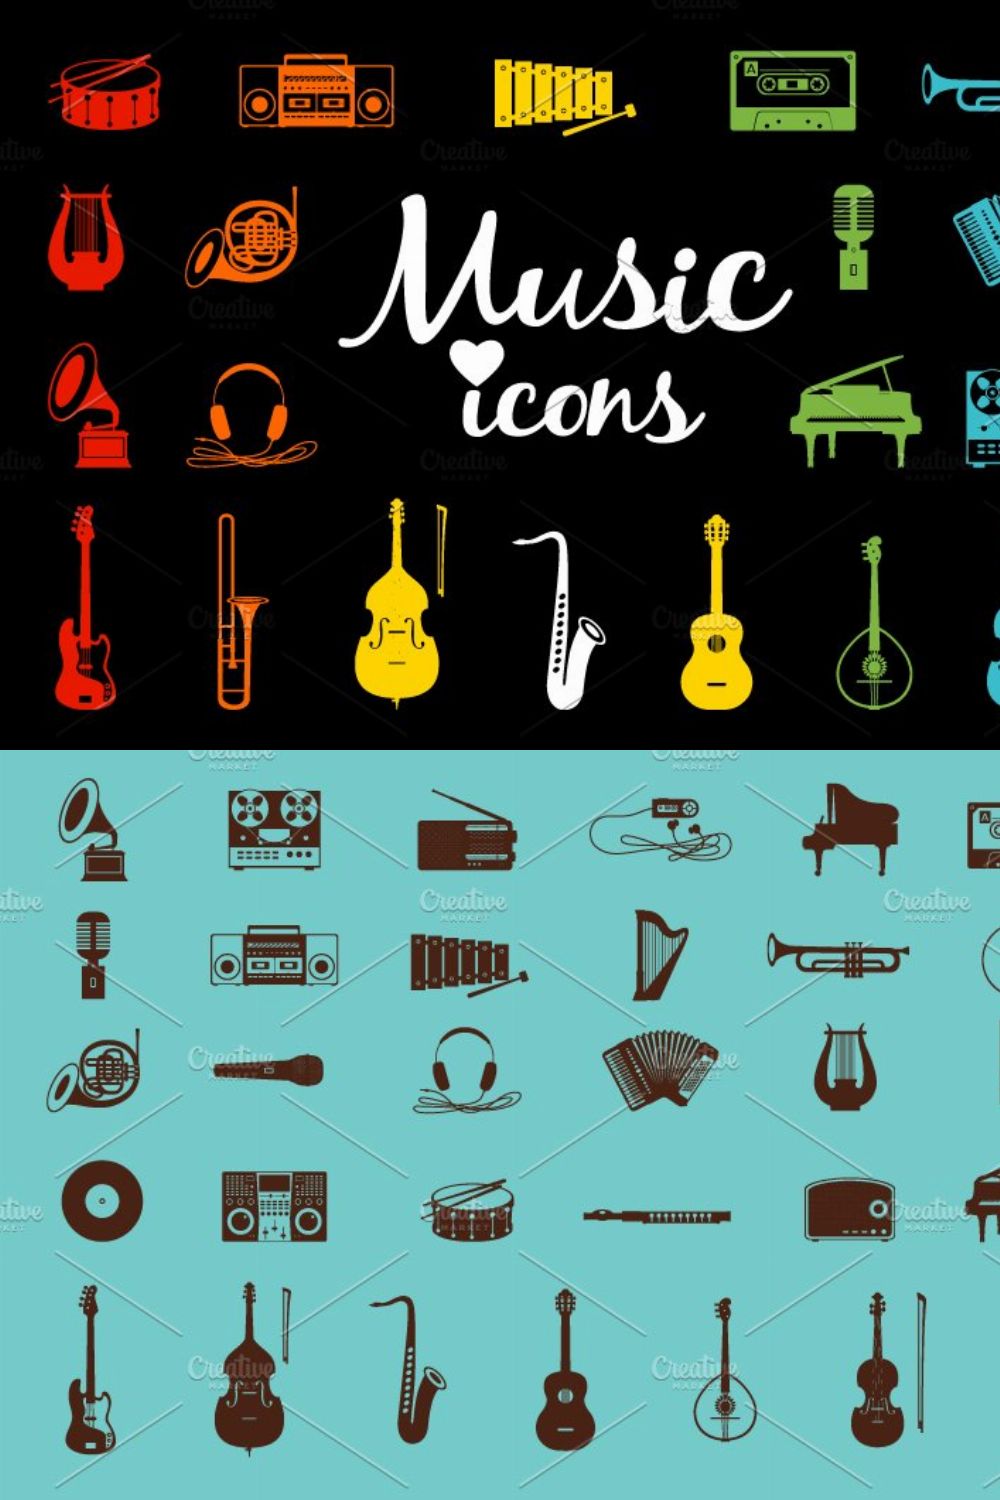 Music instruments icons pinterest preview image.